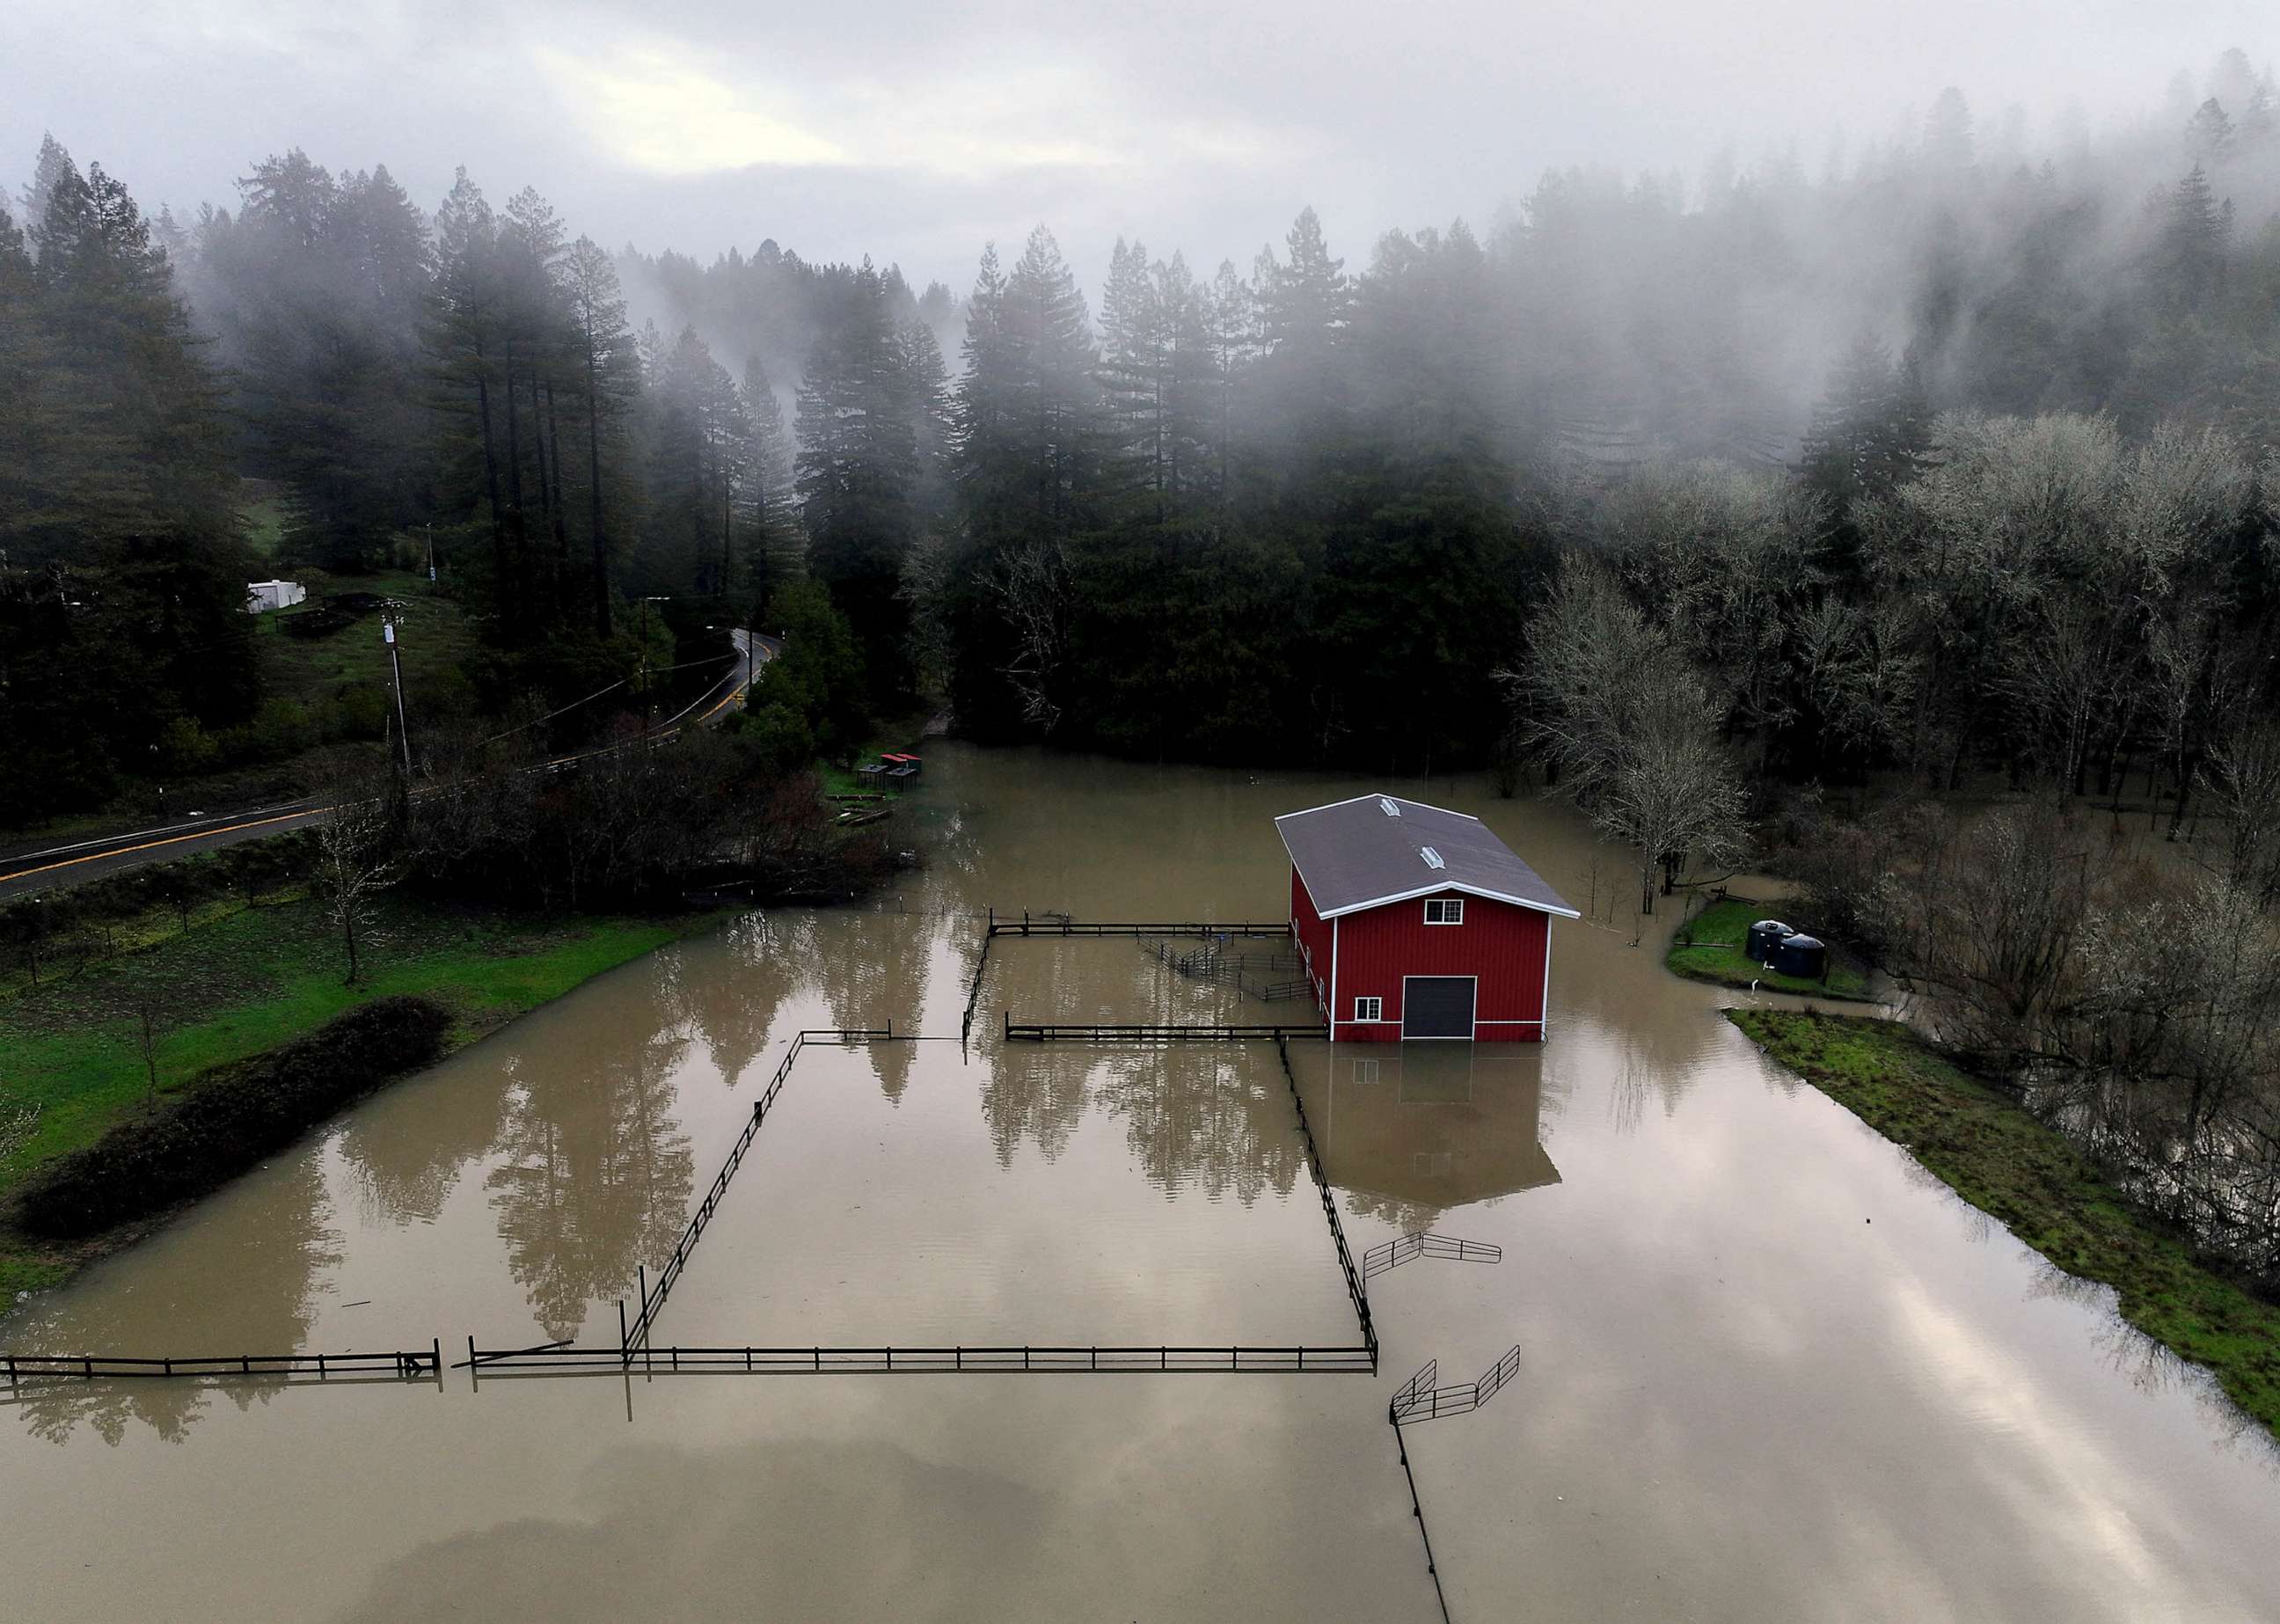 PHOTO: A building surrounded by floodwaters following a chain of winter storms is seen Jan. 15, 2023 in Guerneville, Calif.